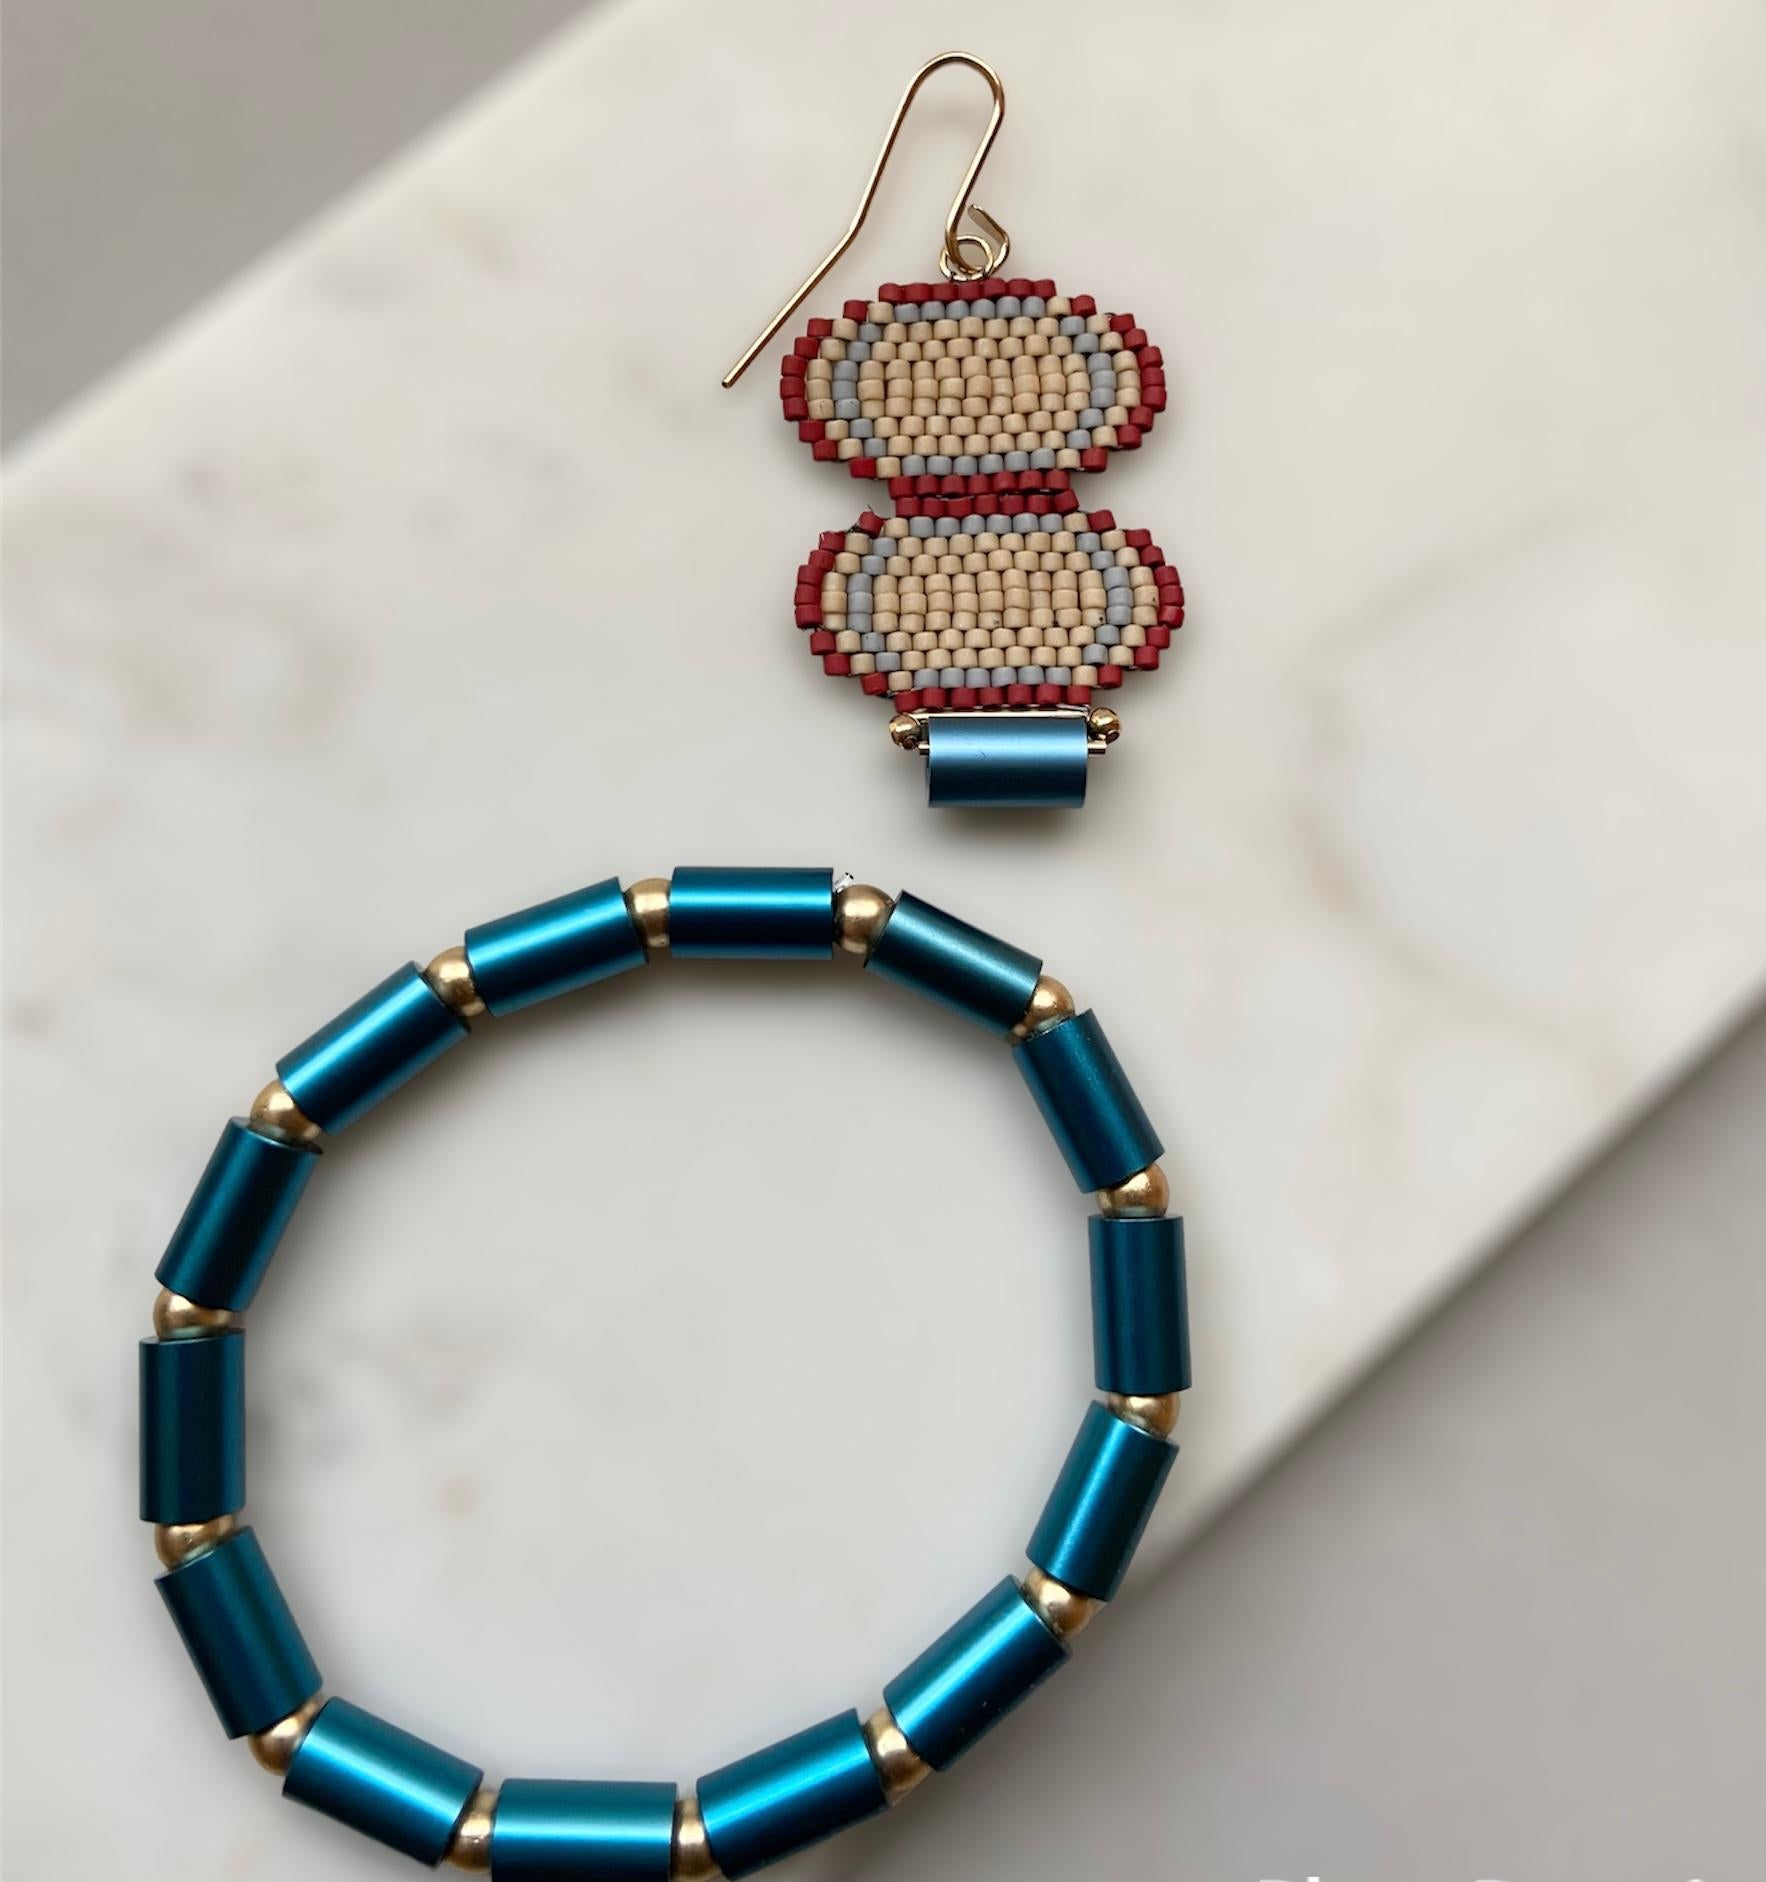 Premium Japanese Miyuki glass beads are hand woven in oval shapes in a stage process then woven again to complete these color popping light-weight earrings.  Anodized aluminum and 14K gold filled beads are used for an interesting modern feel.  The